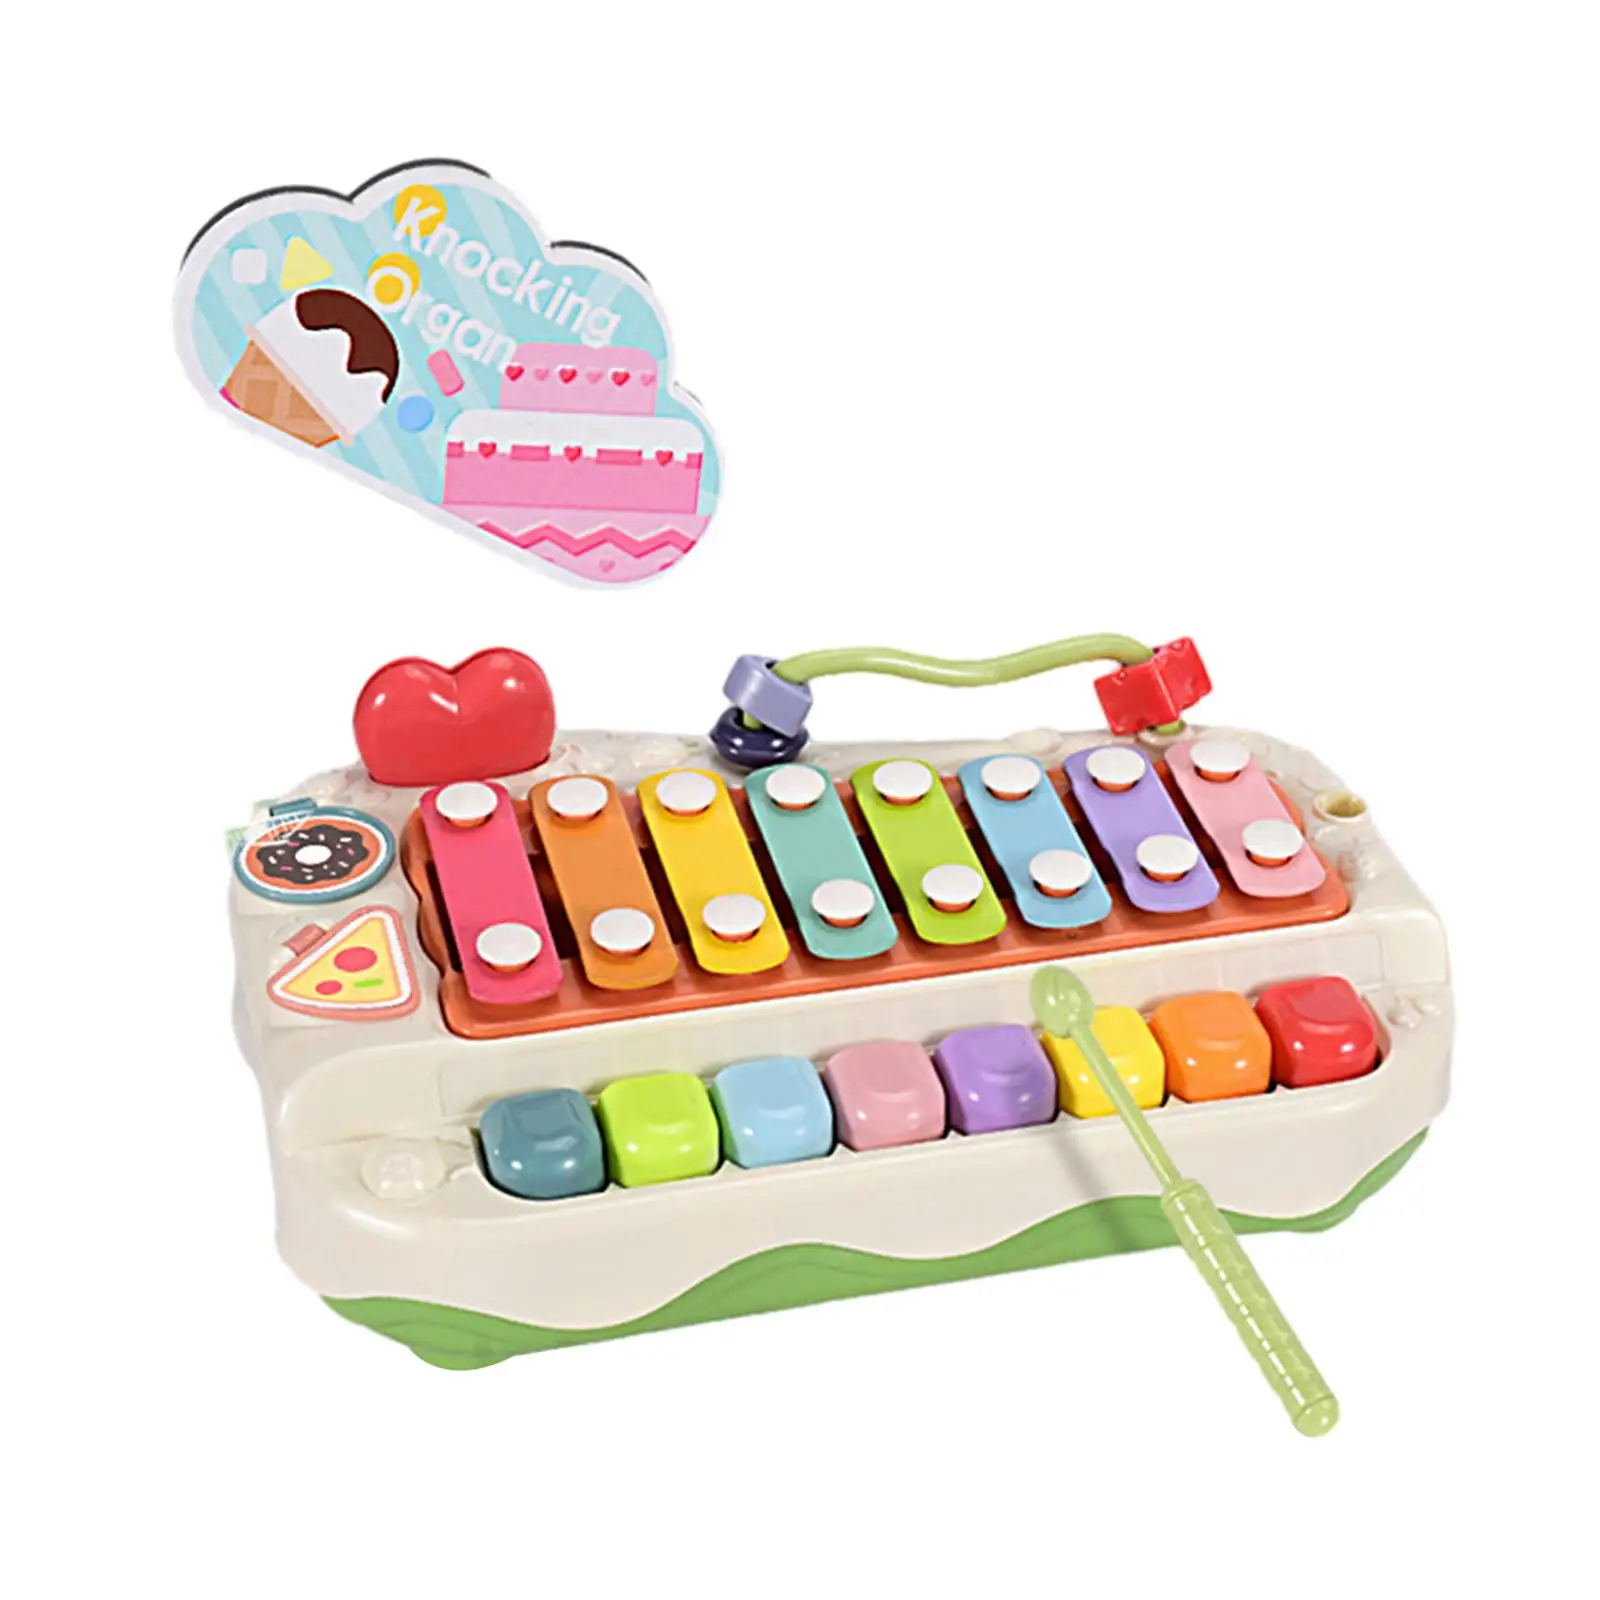 Baby Musical Toy Colorful Motor Skills Educational Hand Knocking Piano for Baby 1 2 3 Years Old Kids Boy Girls Holiday Gifts